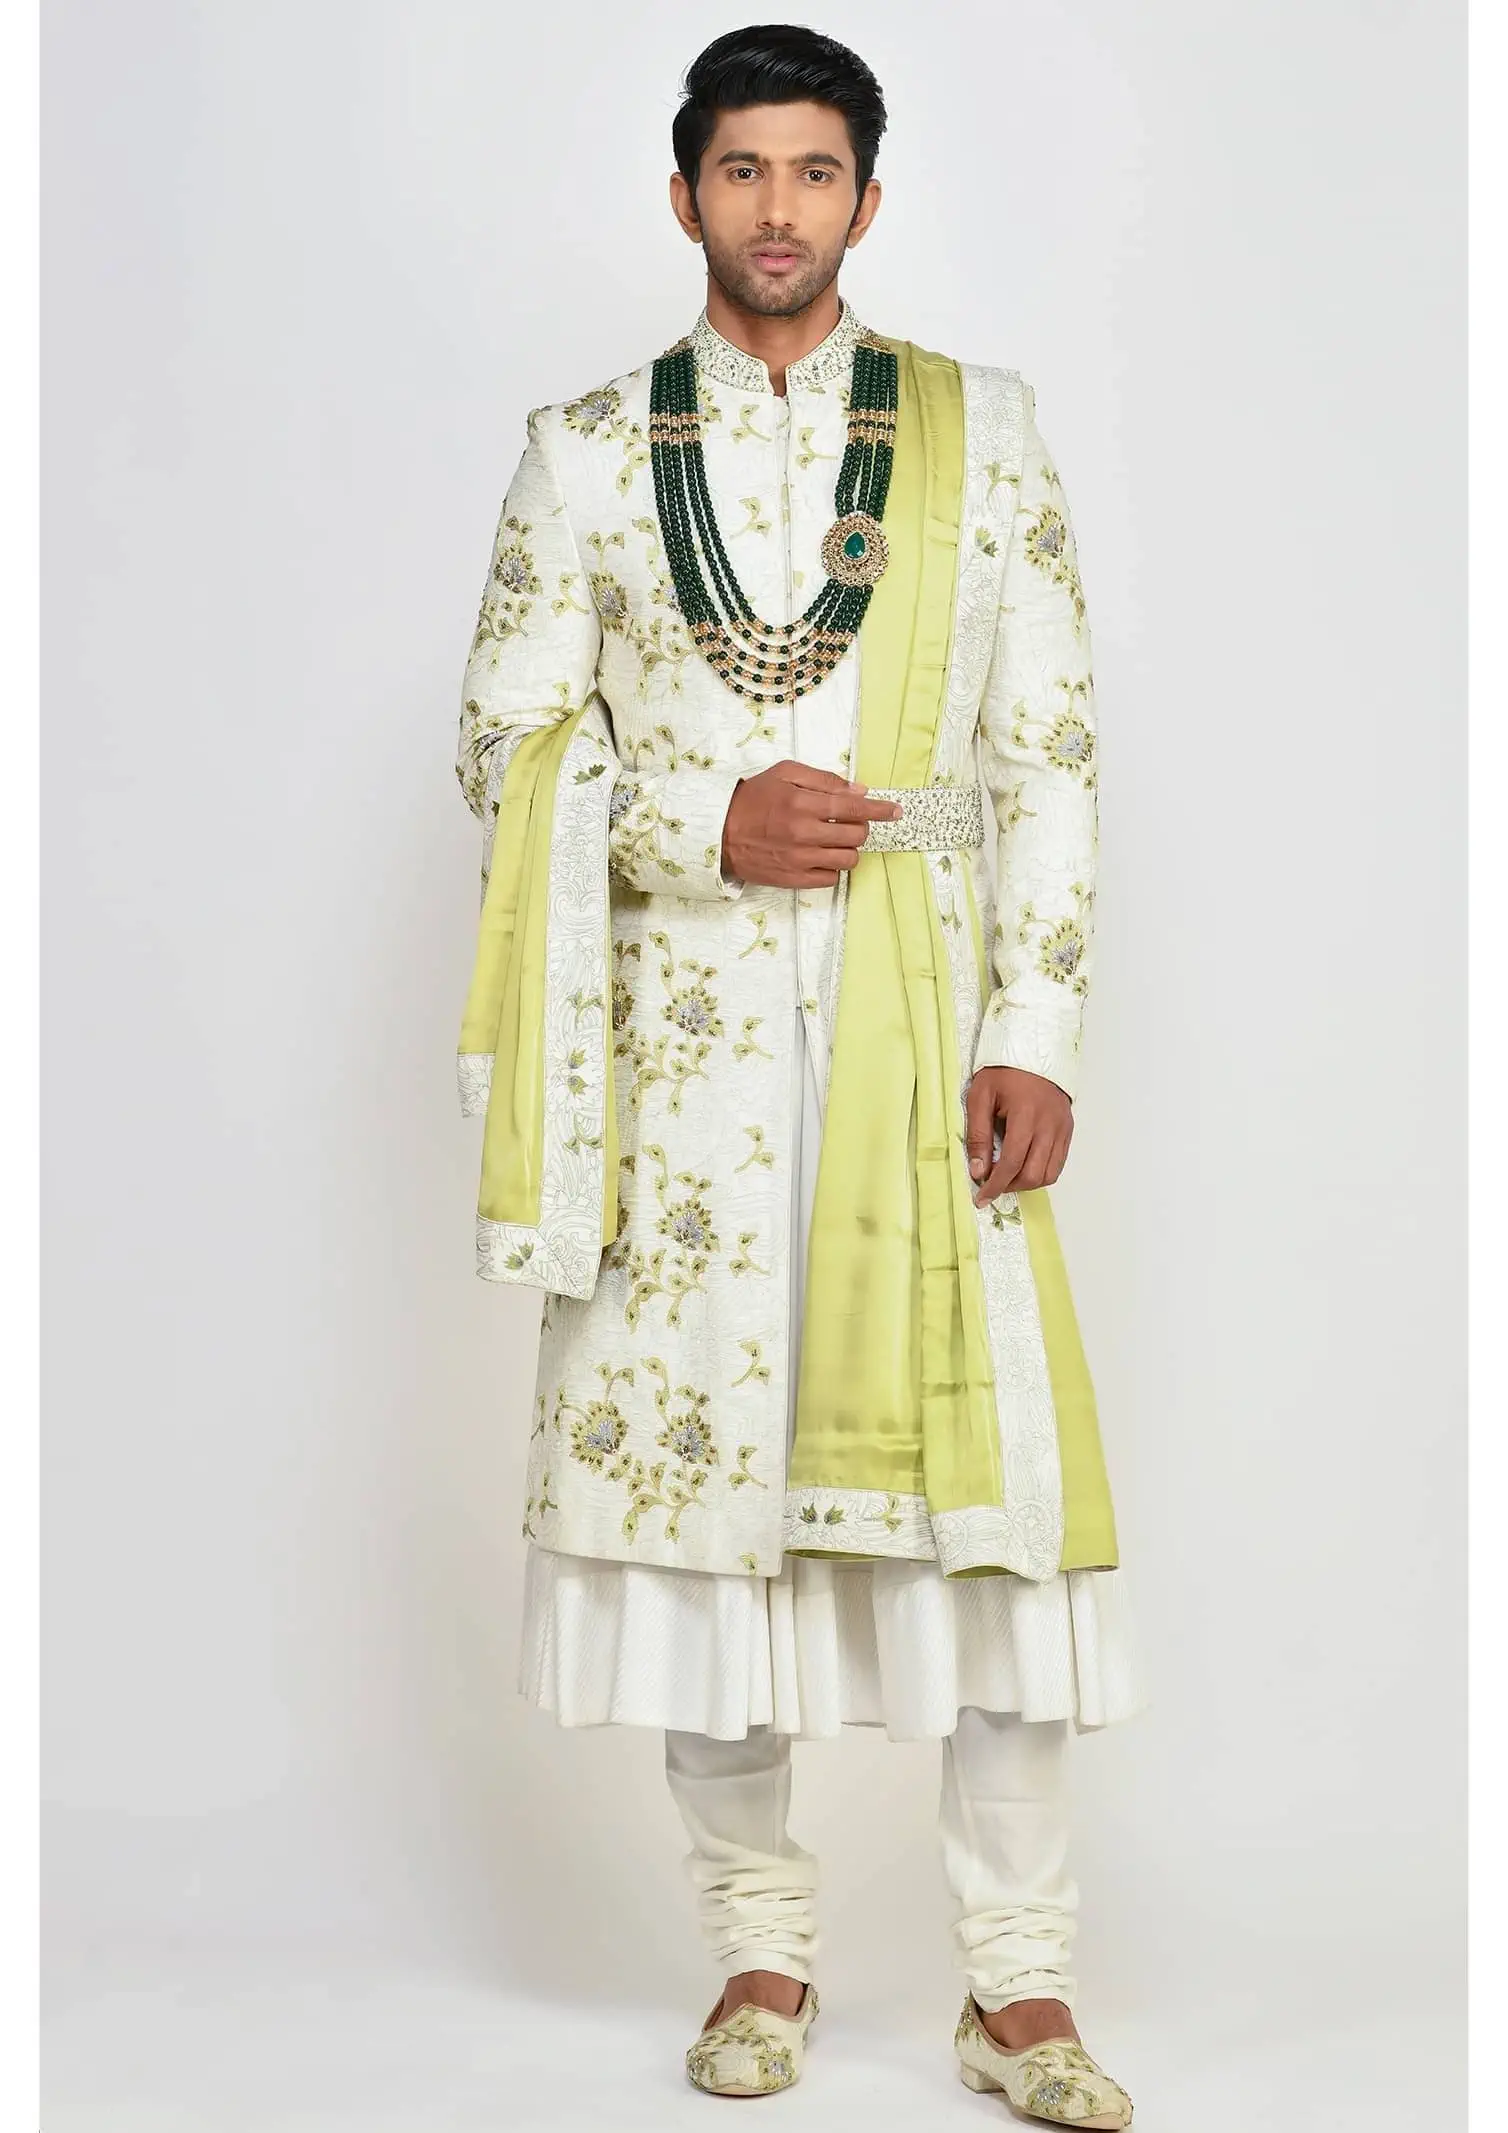 Floral Embroidered Anarkali Sherwani - Indian Groom outfit